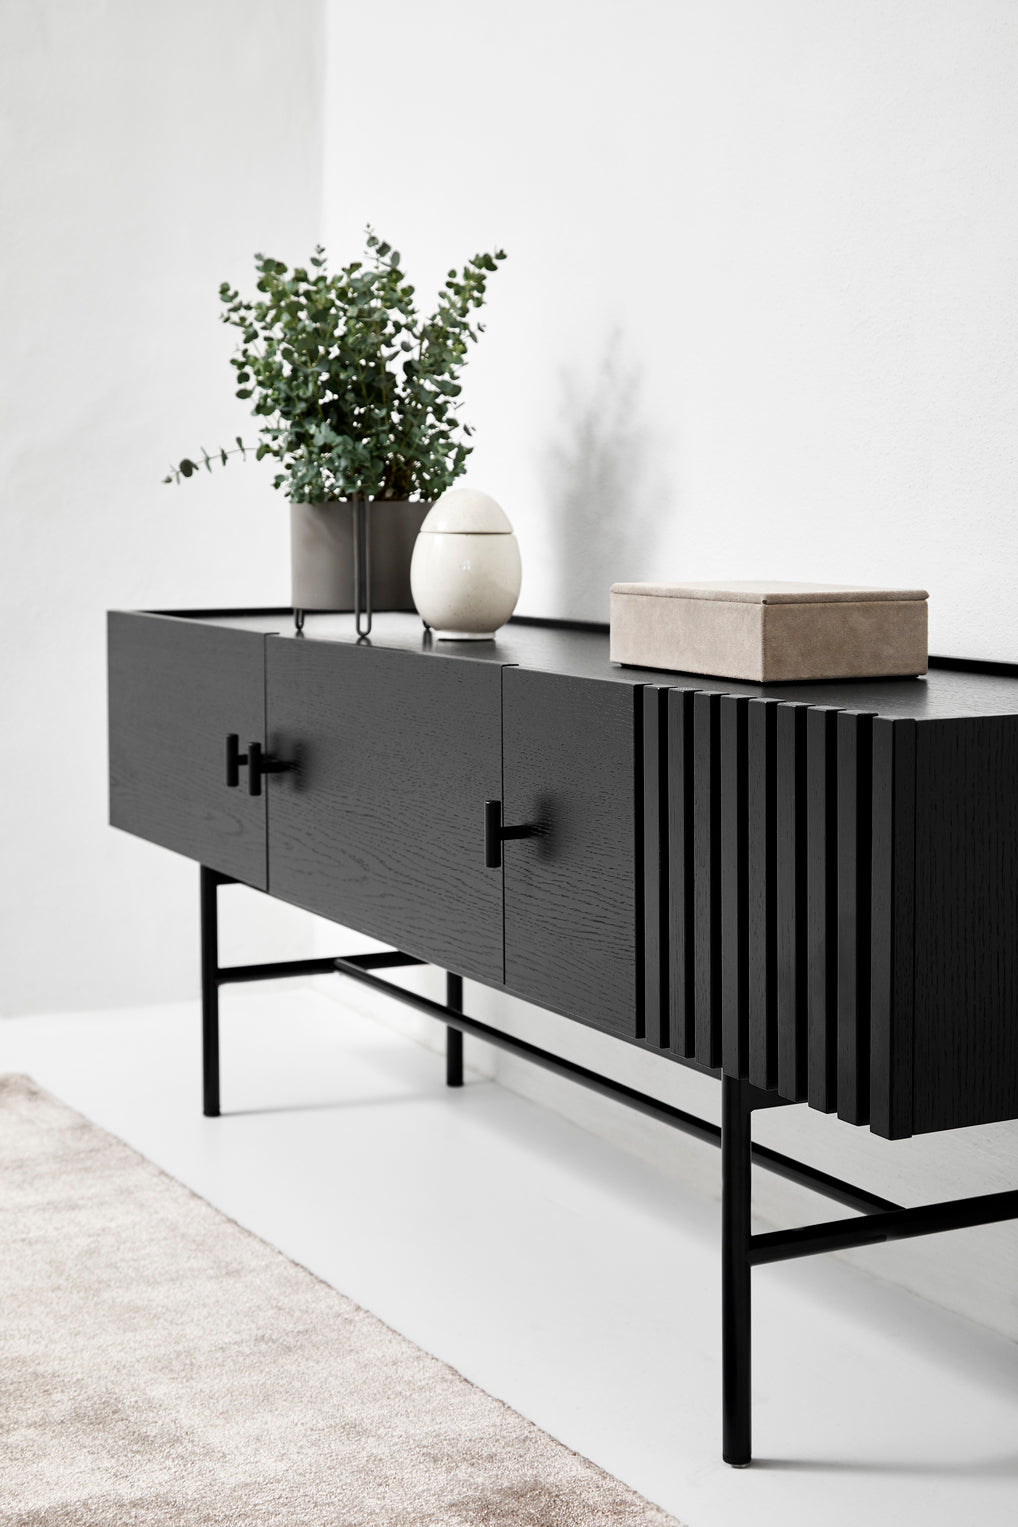 array wall-mounted sideboard (150 cm) - black by woud at adorn.house